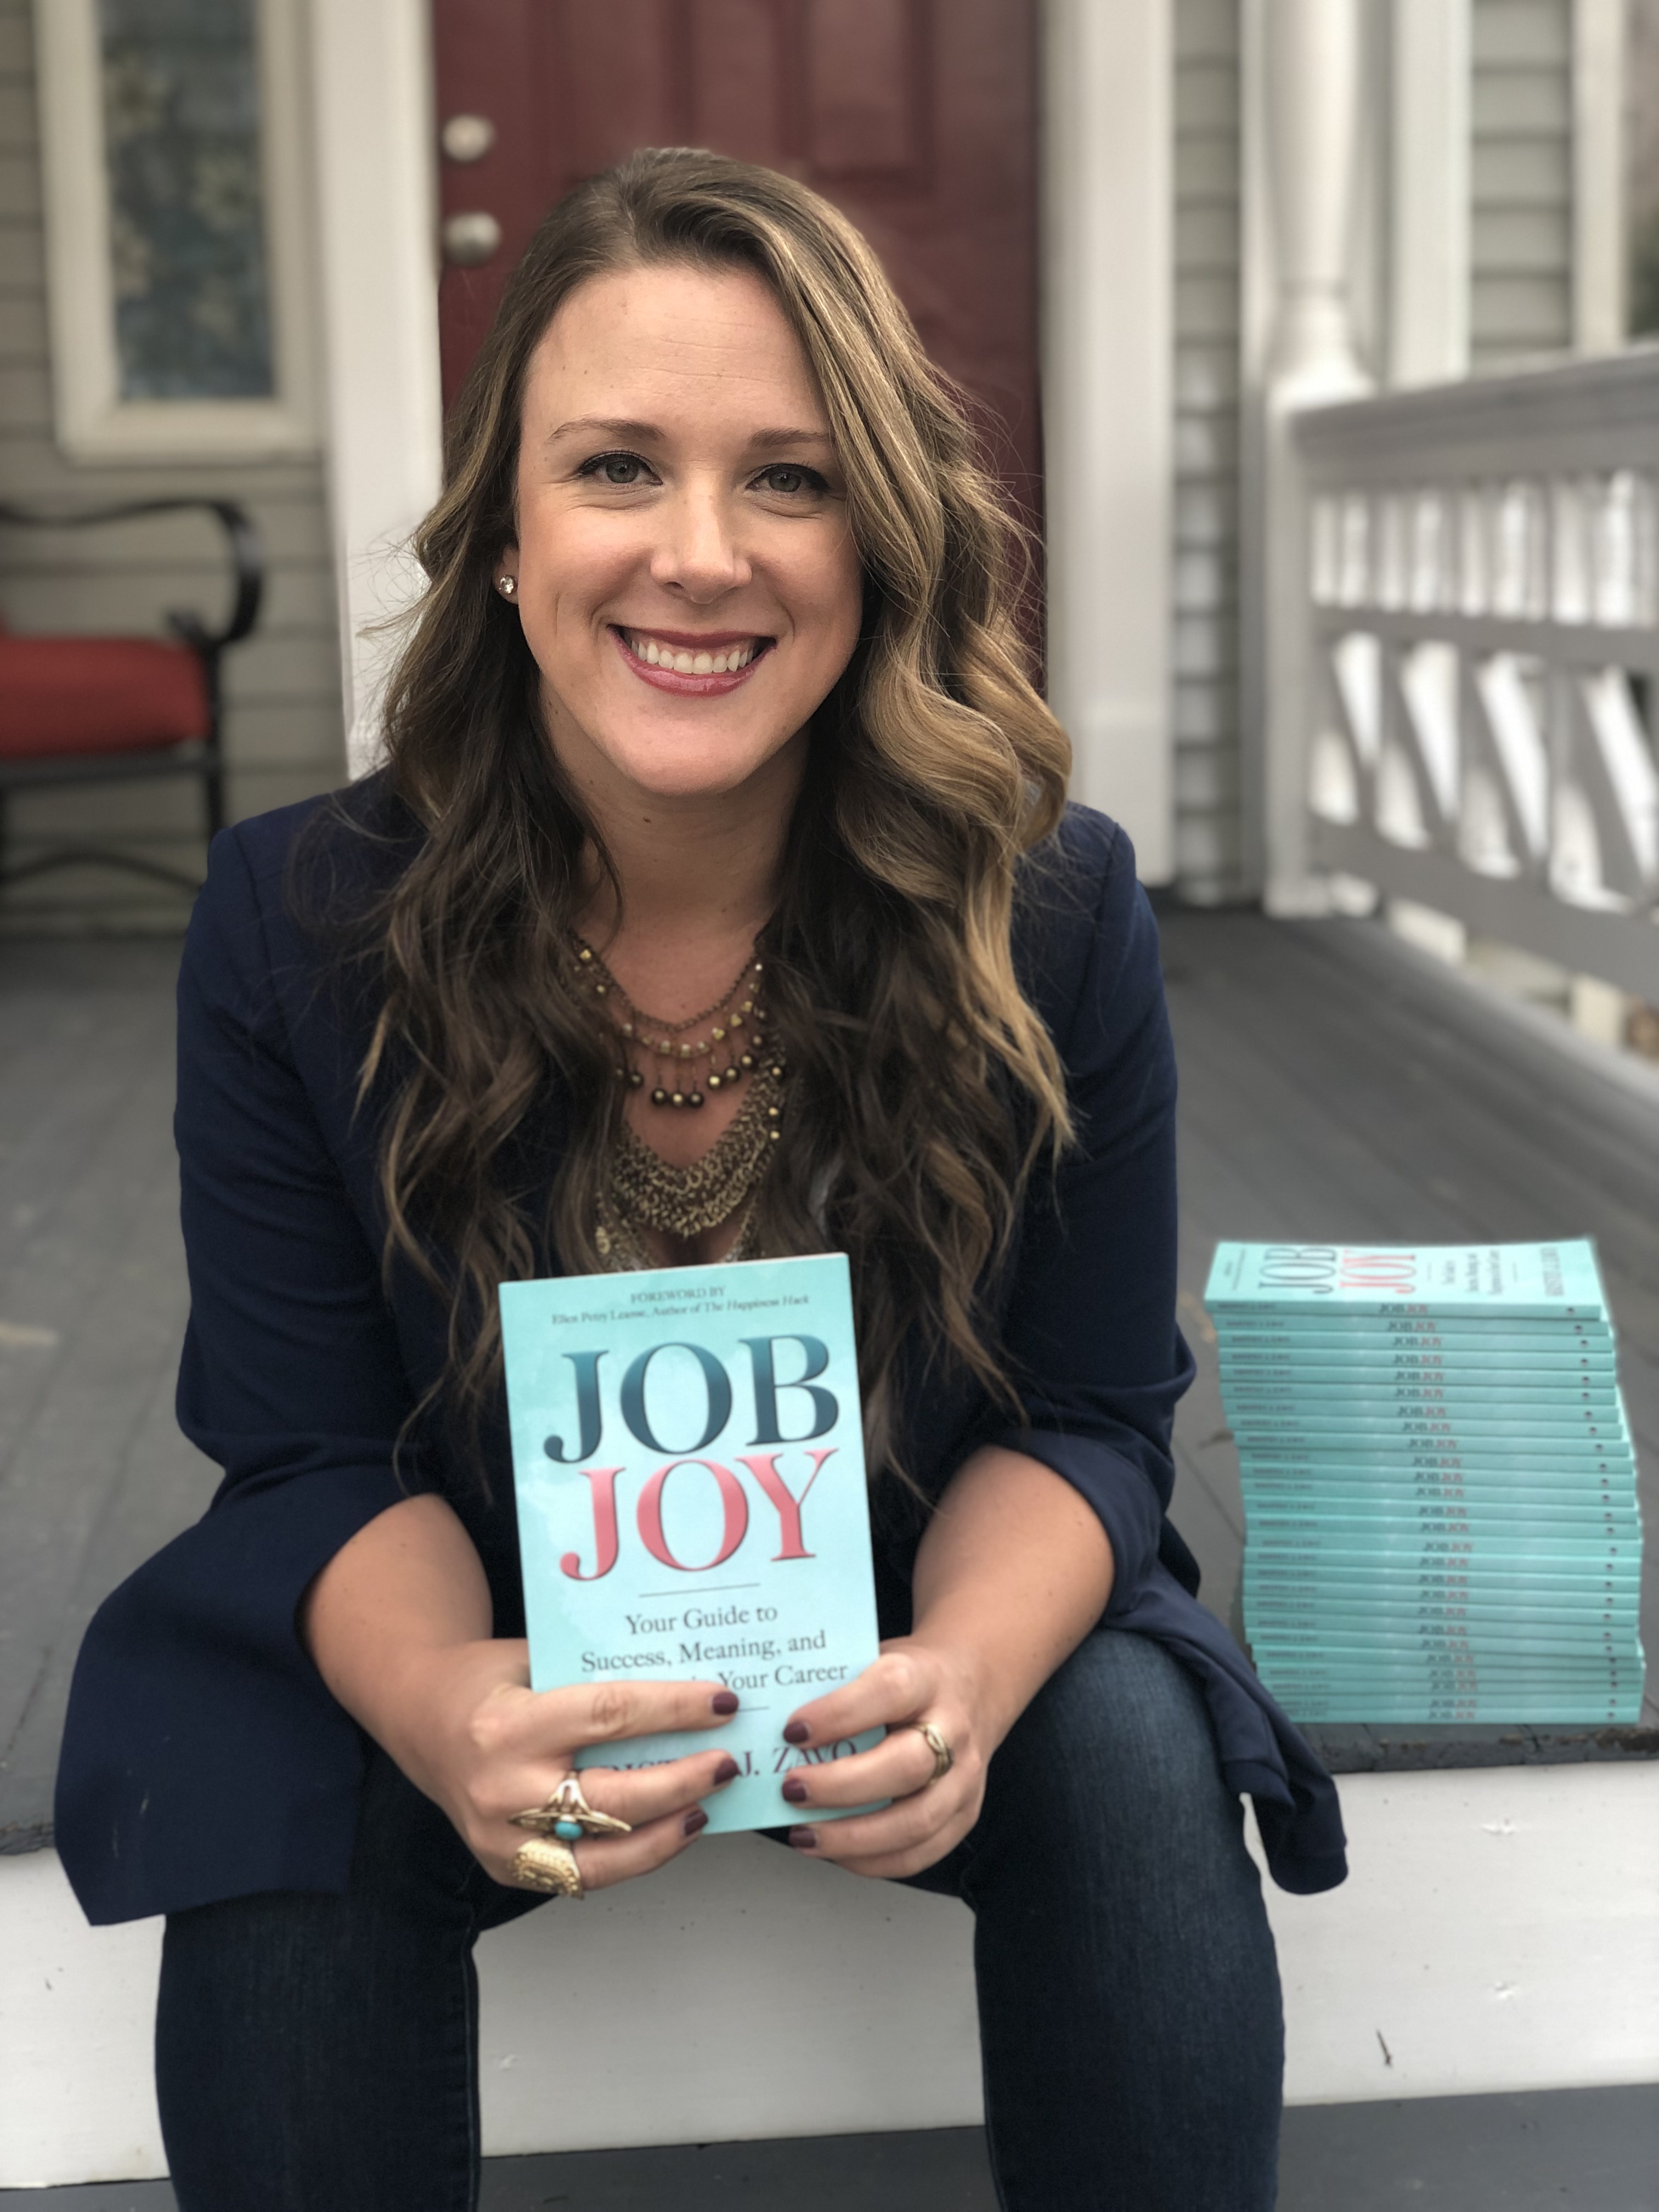 Kristen Zavo is a career coach and the author of Job Joy: Your Guide to Success, Meaning, and Happiness in Your Career. After spending nearly two decades in traditional corporate roles, she now helps high achievers find work they love. She believes it's never too late to find work that excites and inspires you - and that life's too short for anything less! Grab your copy of Job Joy plus a free bonus gift at jobjoybook.com!